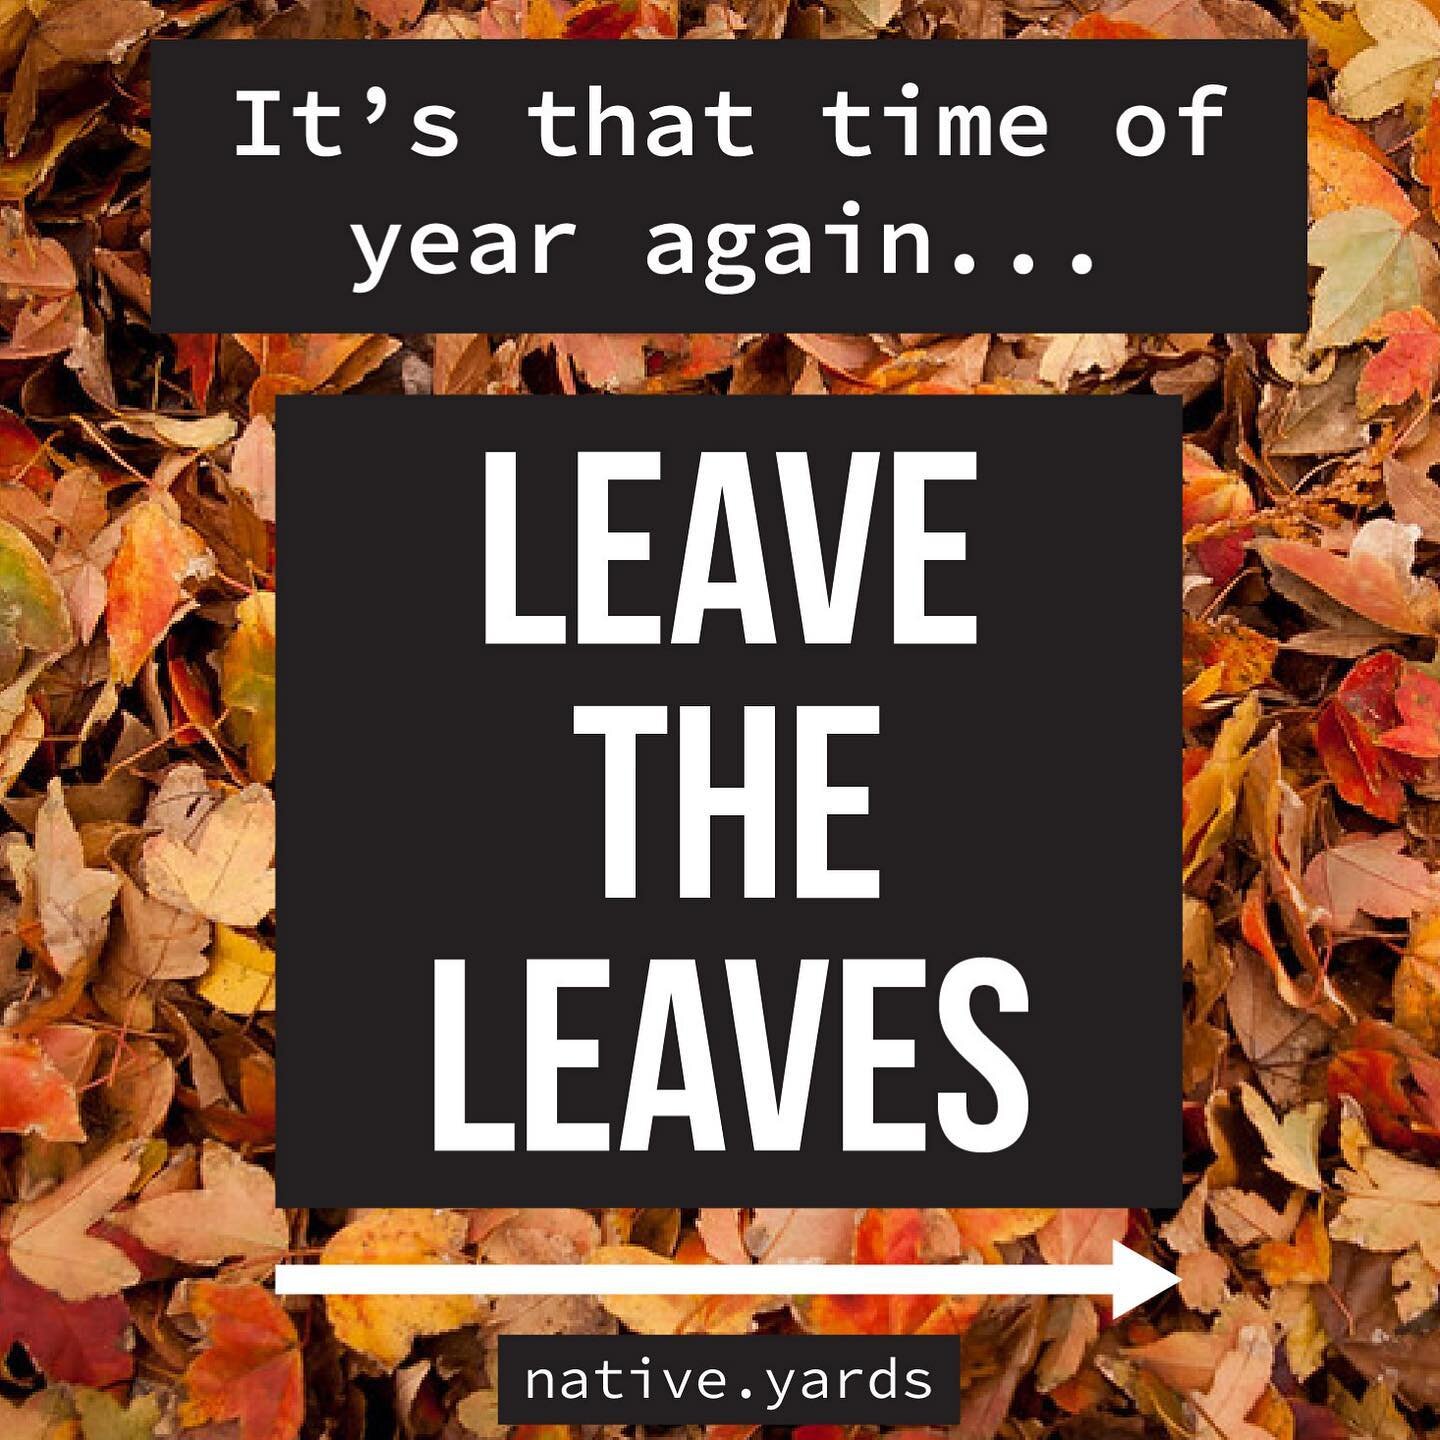 It&rsquo;s that time again, folks. The leaves are falling and the humans are packing them into trash bags to send to the landfill then wondering why plants won&rsquo;t grow for them the next spring.

It&rsquo;s not just some weird unimportant coincid